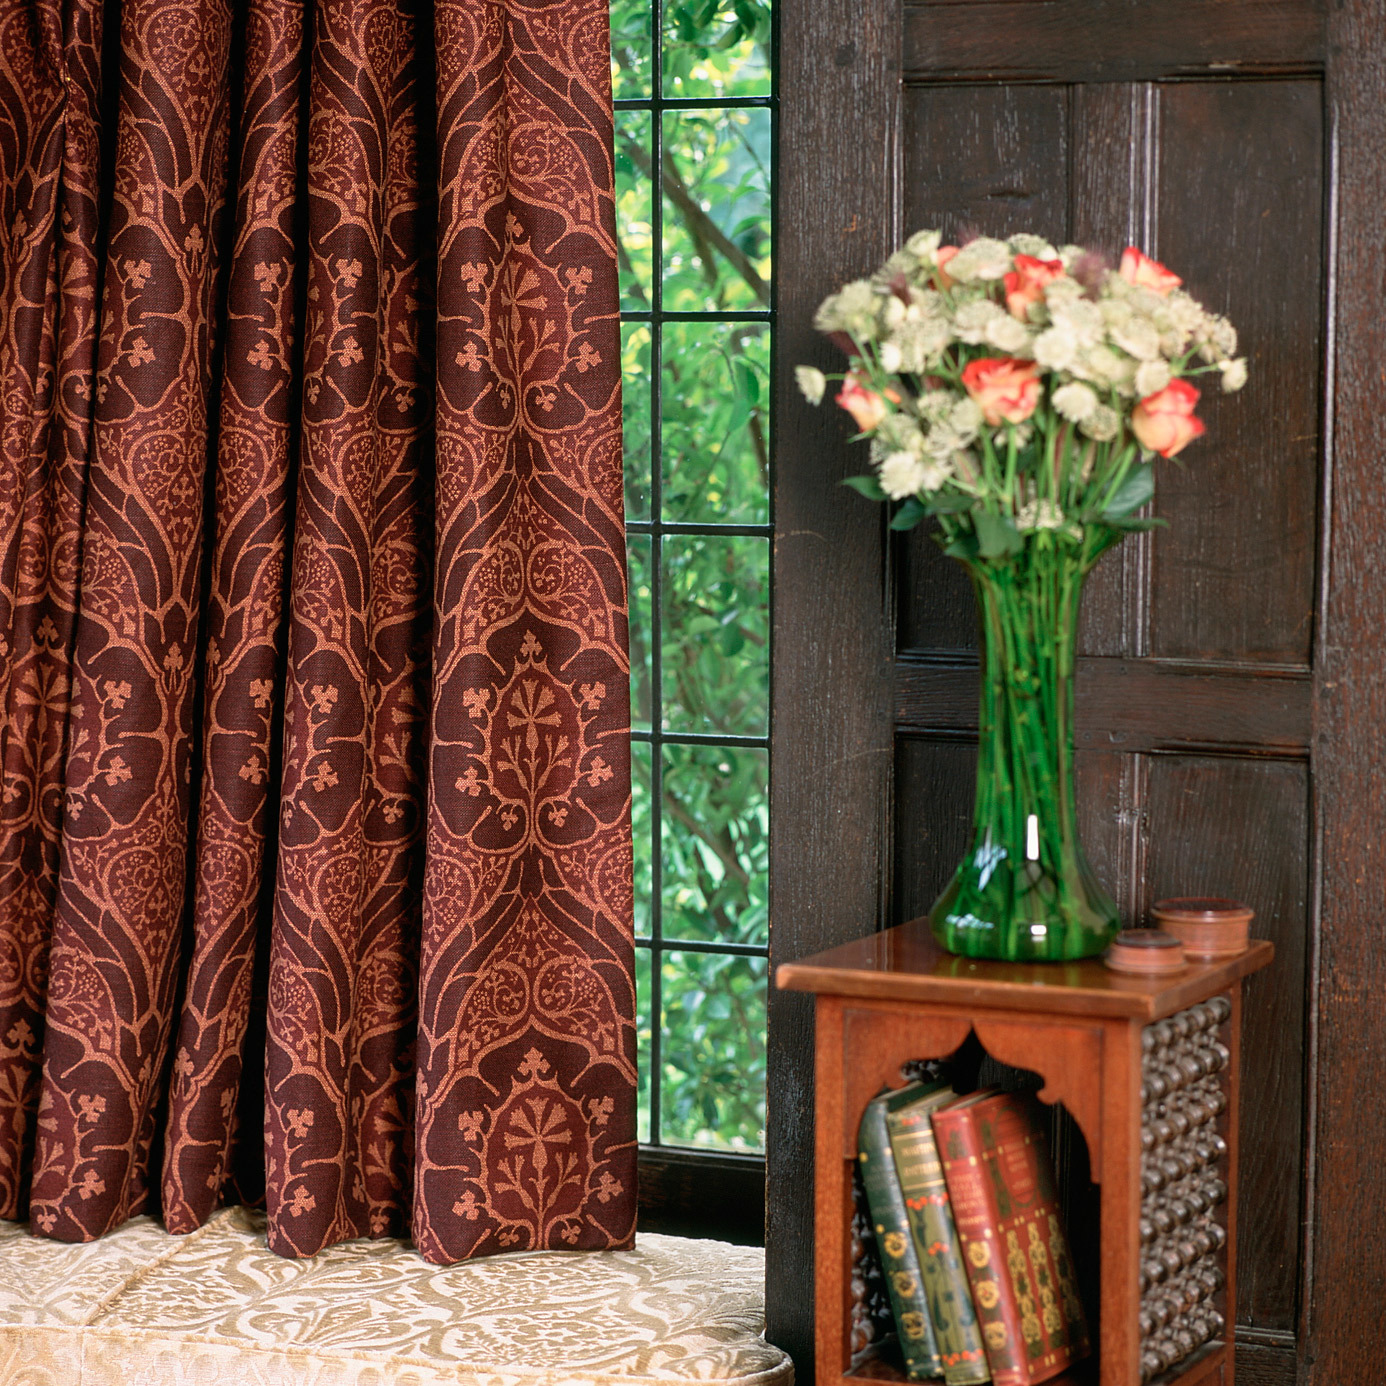 Voysey Red Fabric by MOR